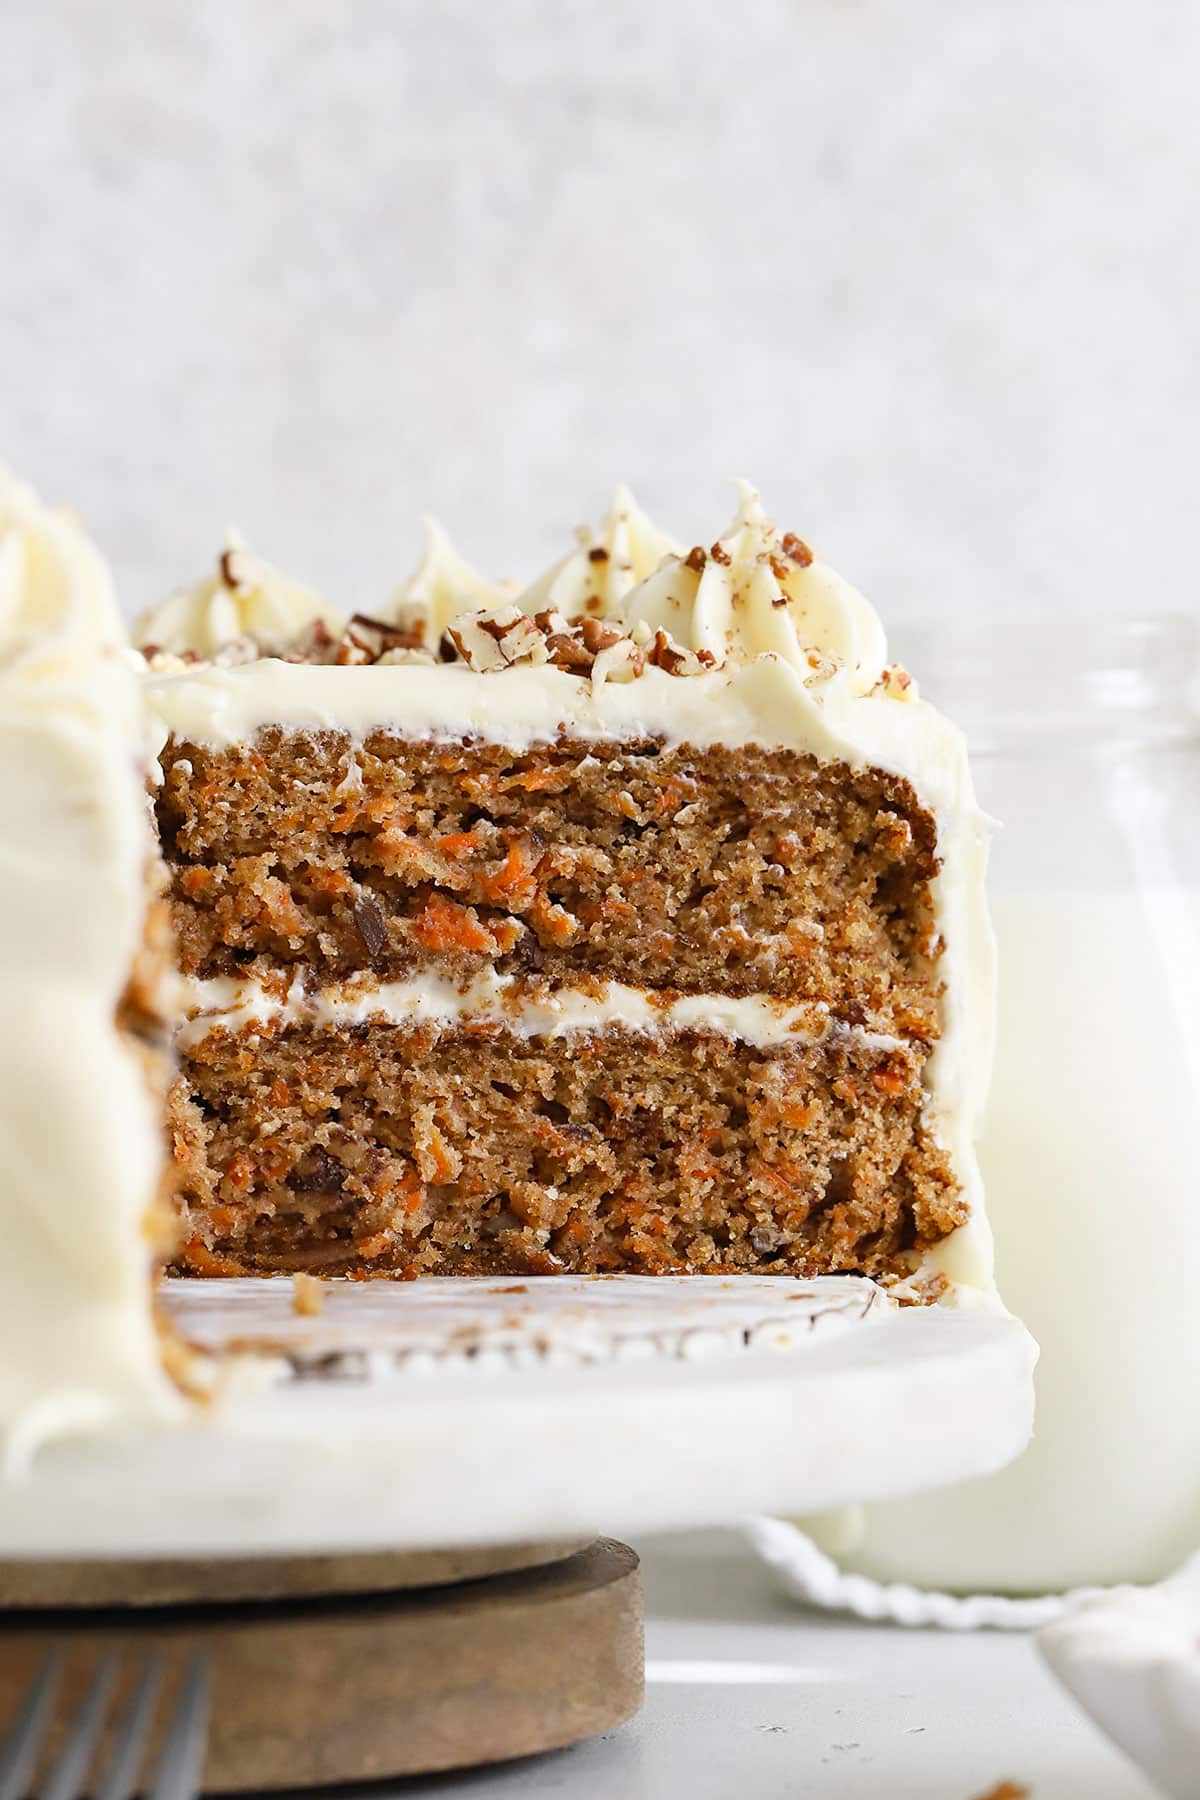 An inside view of a two-layer gluten-free carrot cake with cream cheese frosting